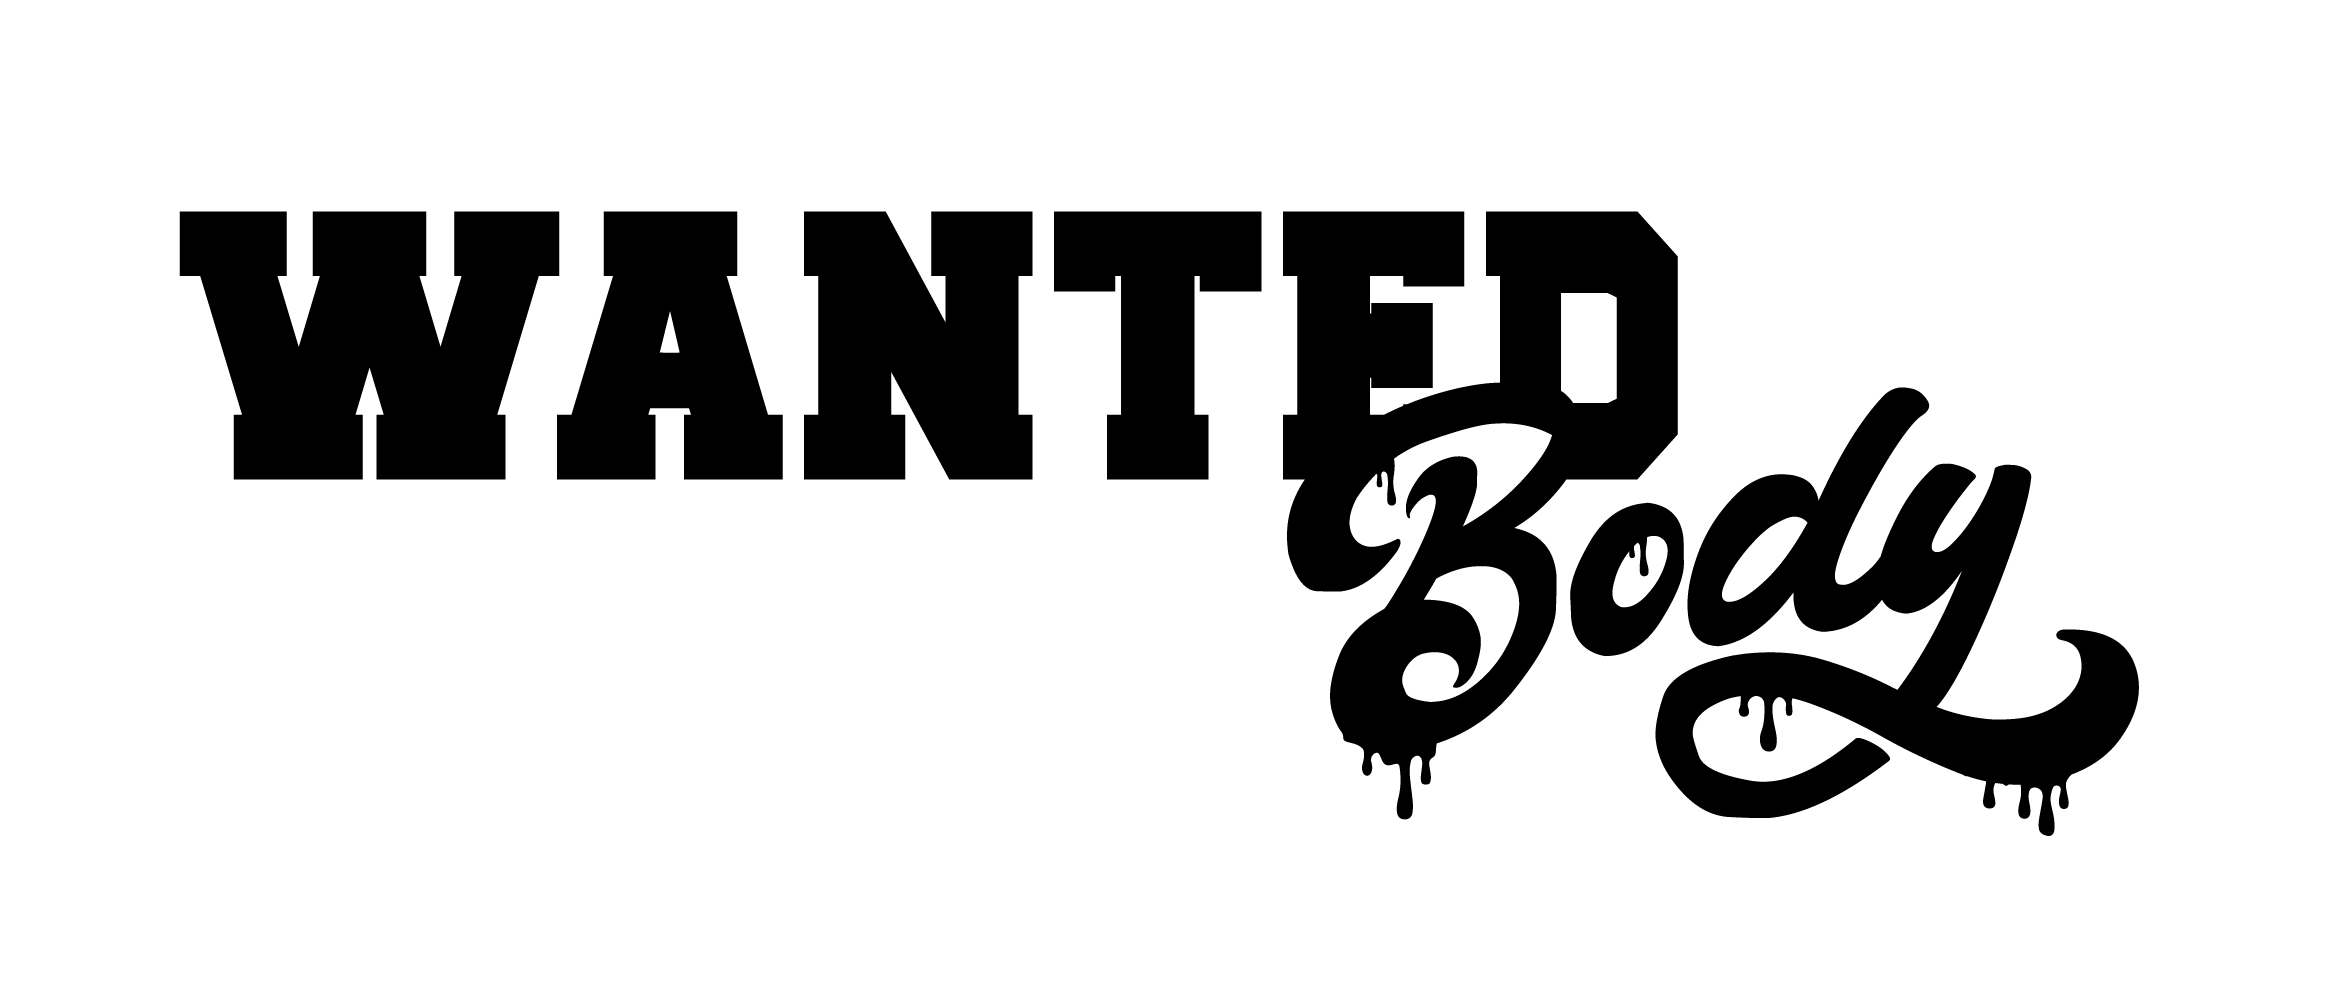 Wanted Body 